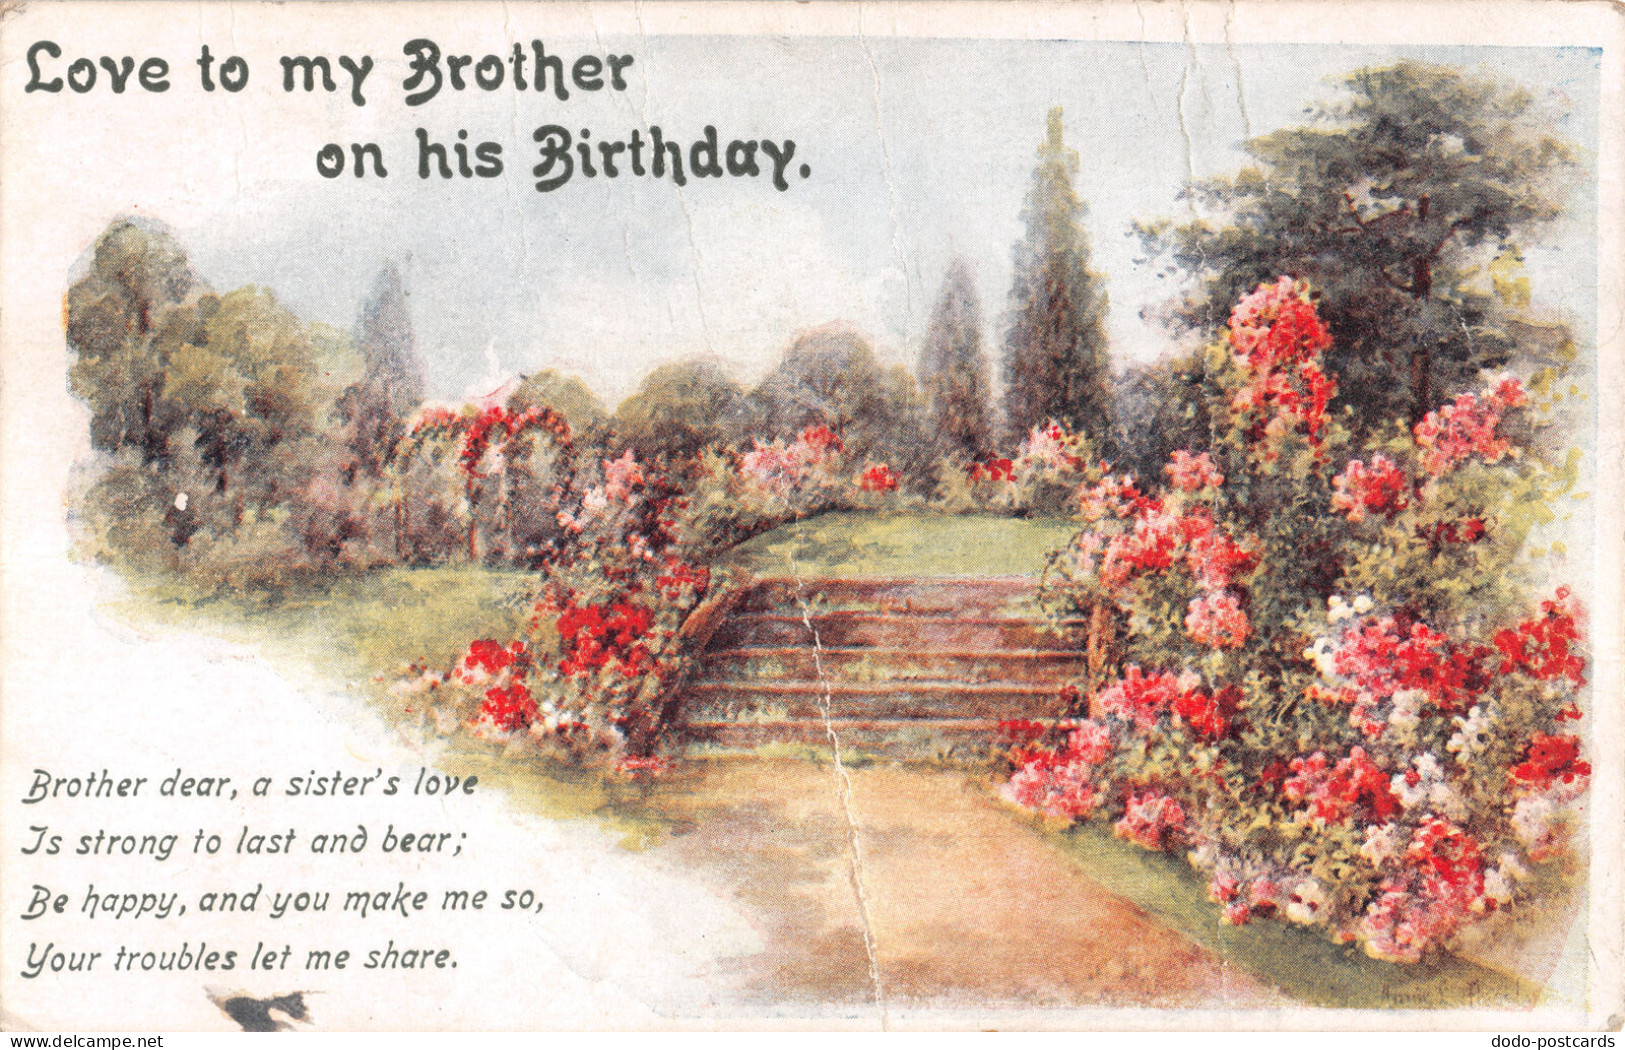 R297847 Greeting Card. Birthday. Brother. Poetry. Flowers. Staircase. Park. No. - Wereld